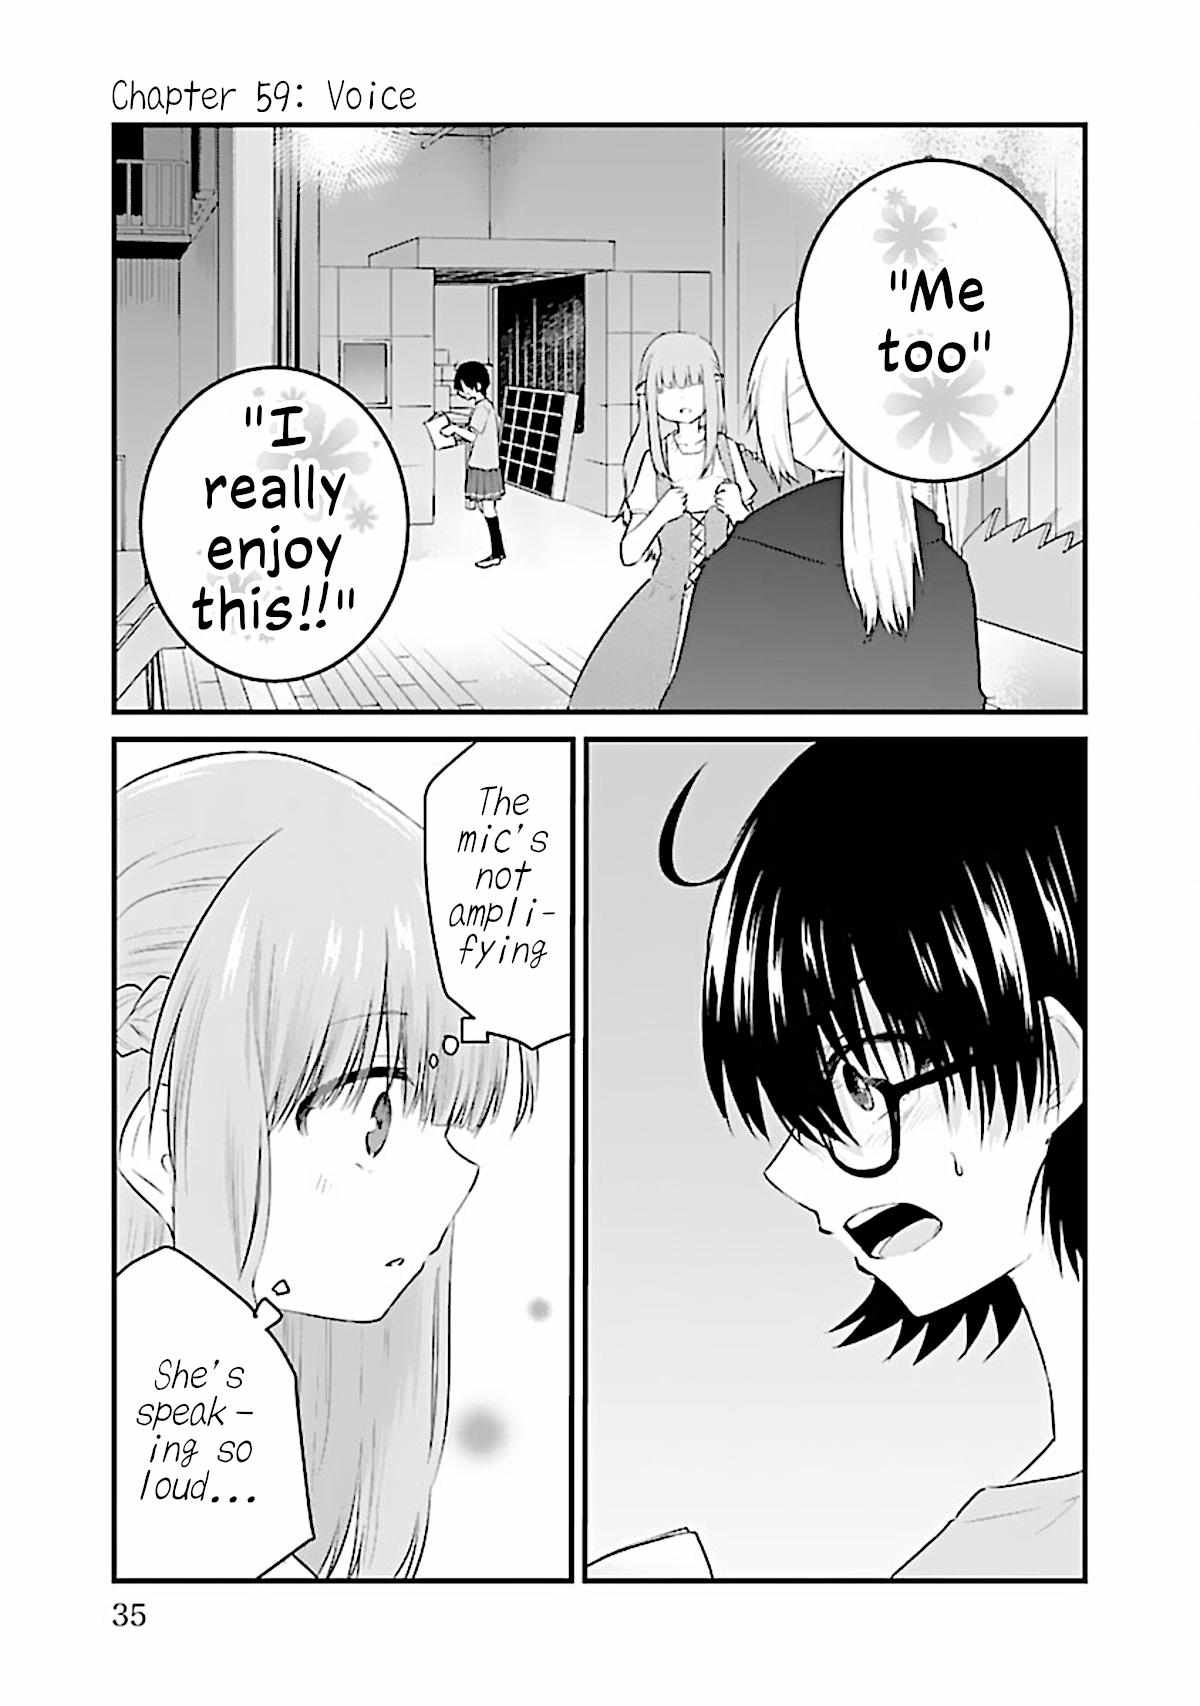 The Mute Girl and Her New Friend Chapter 59